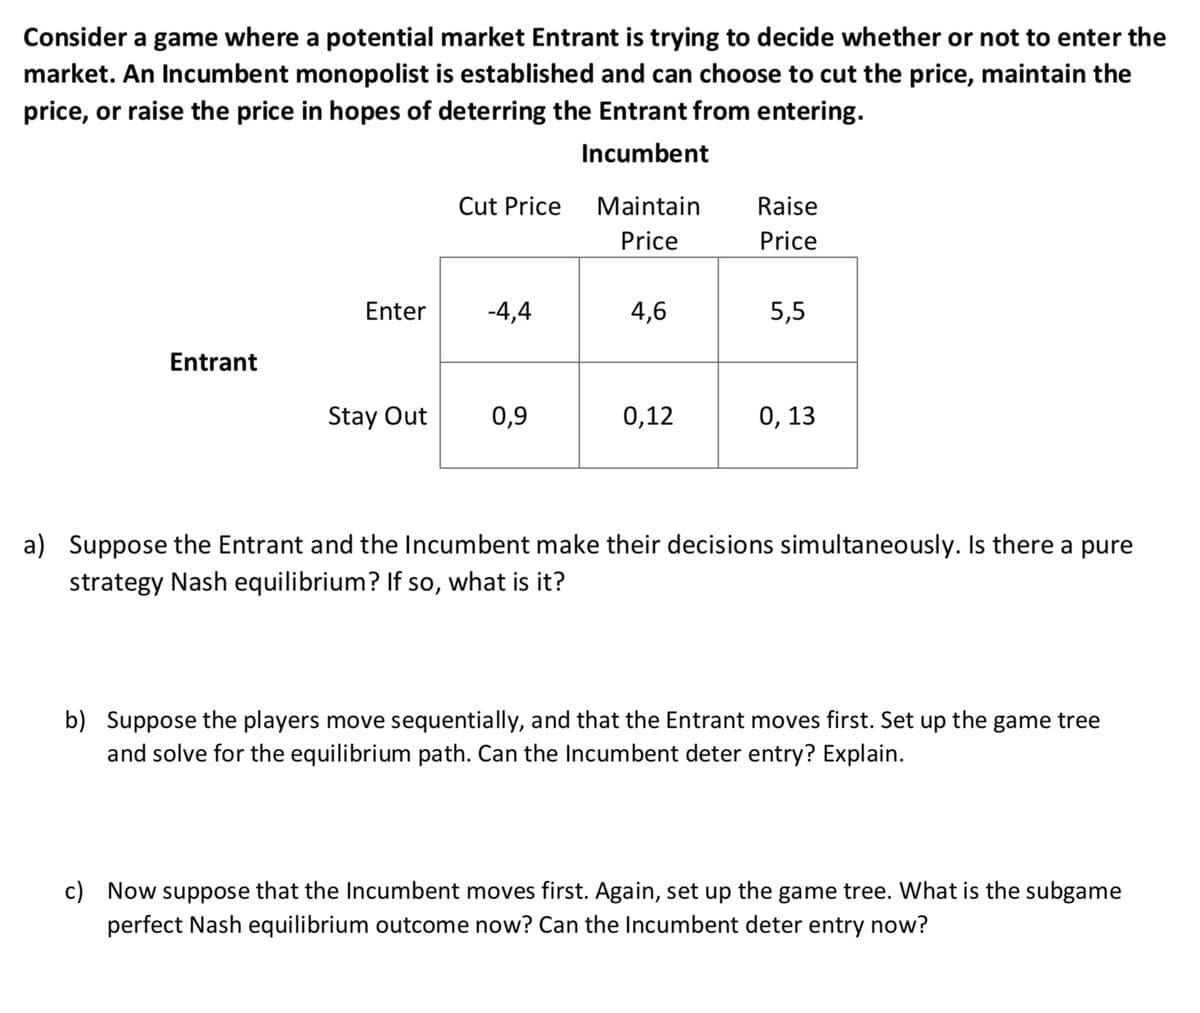 Consider a game where a potential market Entrant is trying to decide whether or not to enter the
market. An Incumbent monopolist is established and can choose to cut the price, maintain the
price, or raise the price in hopes of deterring the Entrant from entering.
Incumbent
Entrant
Enter
Stay Out
Cut Price
-4,4
0,9
Maintain
Price
4,6
0,12
Raise
Price
5,5
0, 13
a) Suppose the Entrant and the Incumbent make their decisions simultaneously. Is there a pure
strategy Nash equilibrium? If so, what is it?
b) Suppose the players move sequentially, and that the Entrant moves first. Set up the game tree
and solve for the equilibrium path. Can the Incumbent deter entry? Explain.
c) Now suppose that the Incumbent moves first. Again, set up the game tree. What is the subgame
perfect Nash equilibrium outcome now? Can the Incumbent deter entry now?